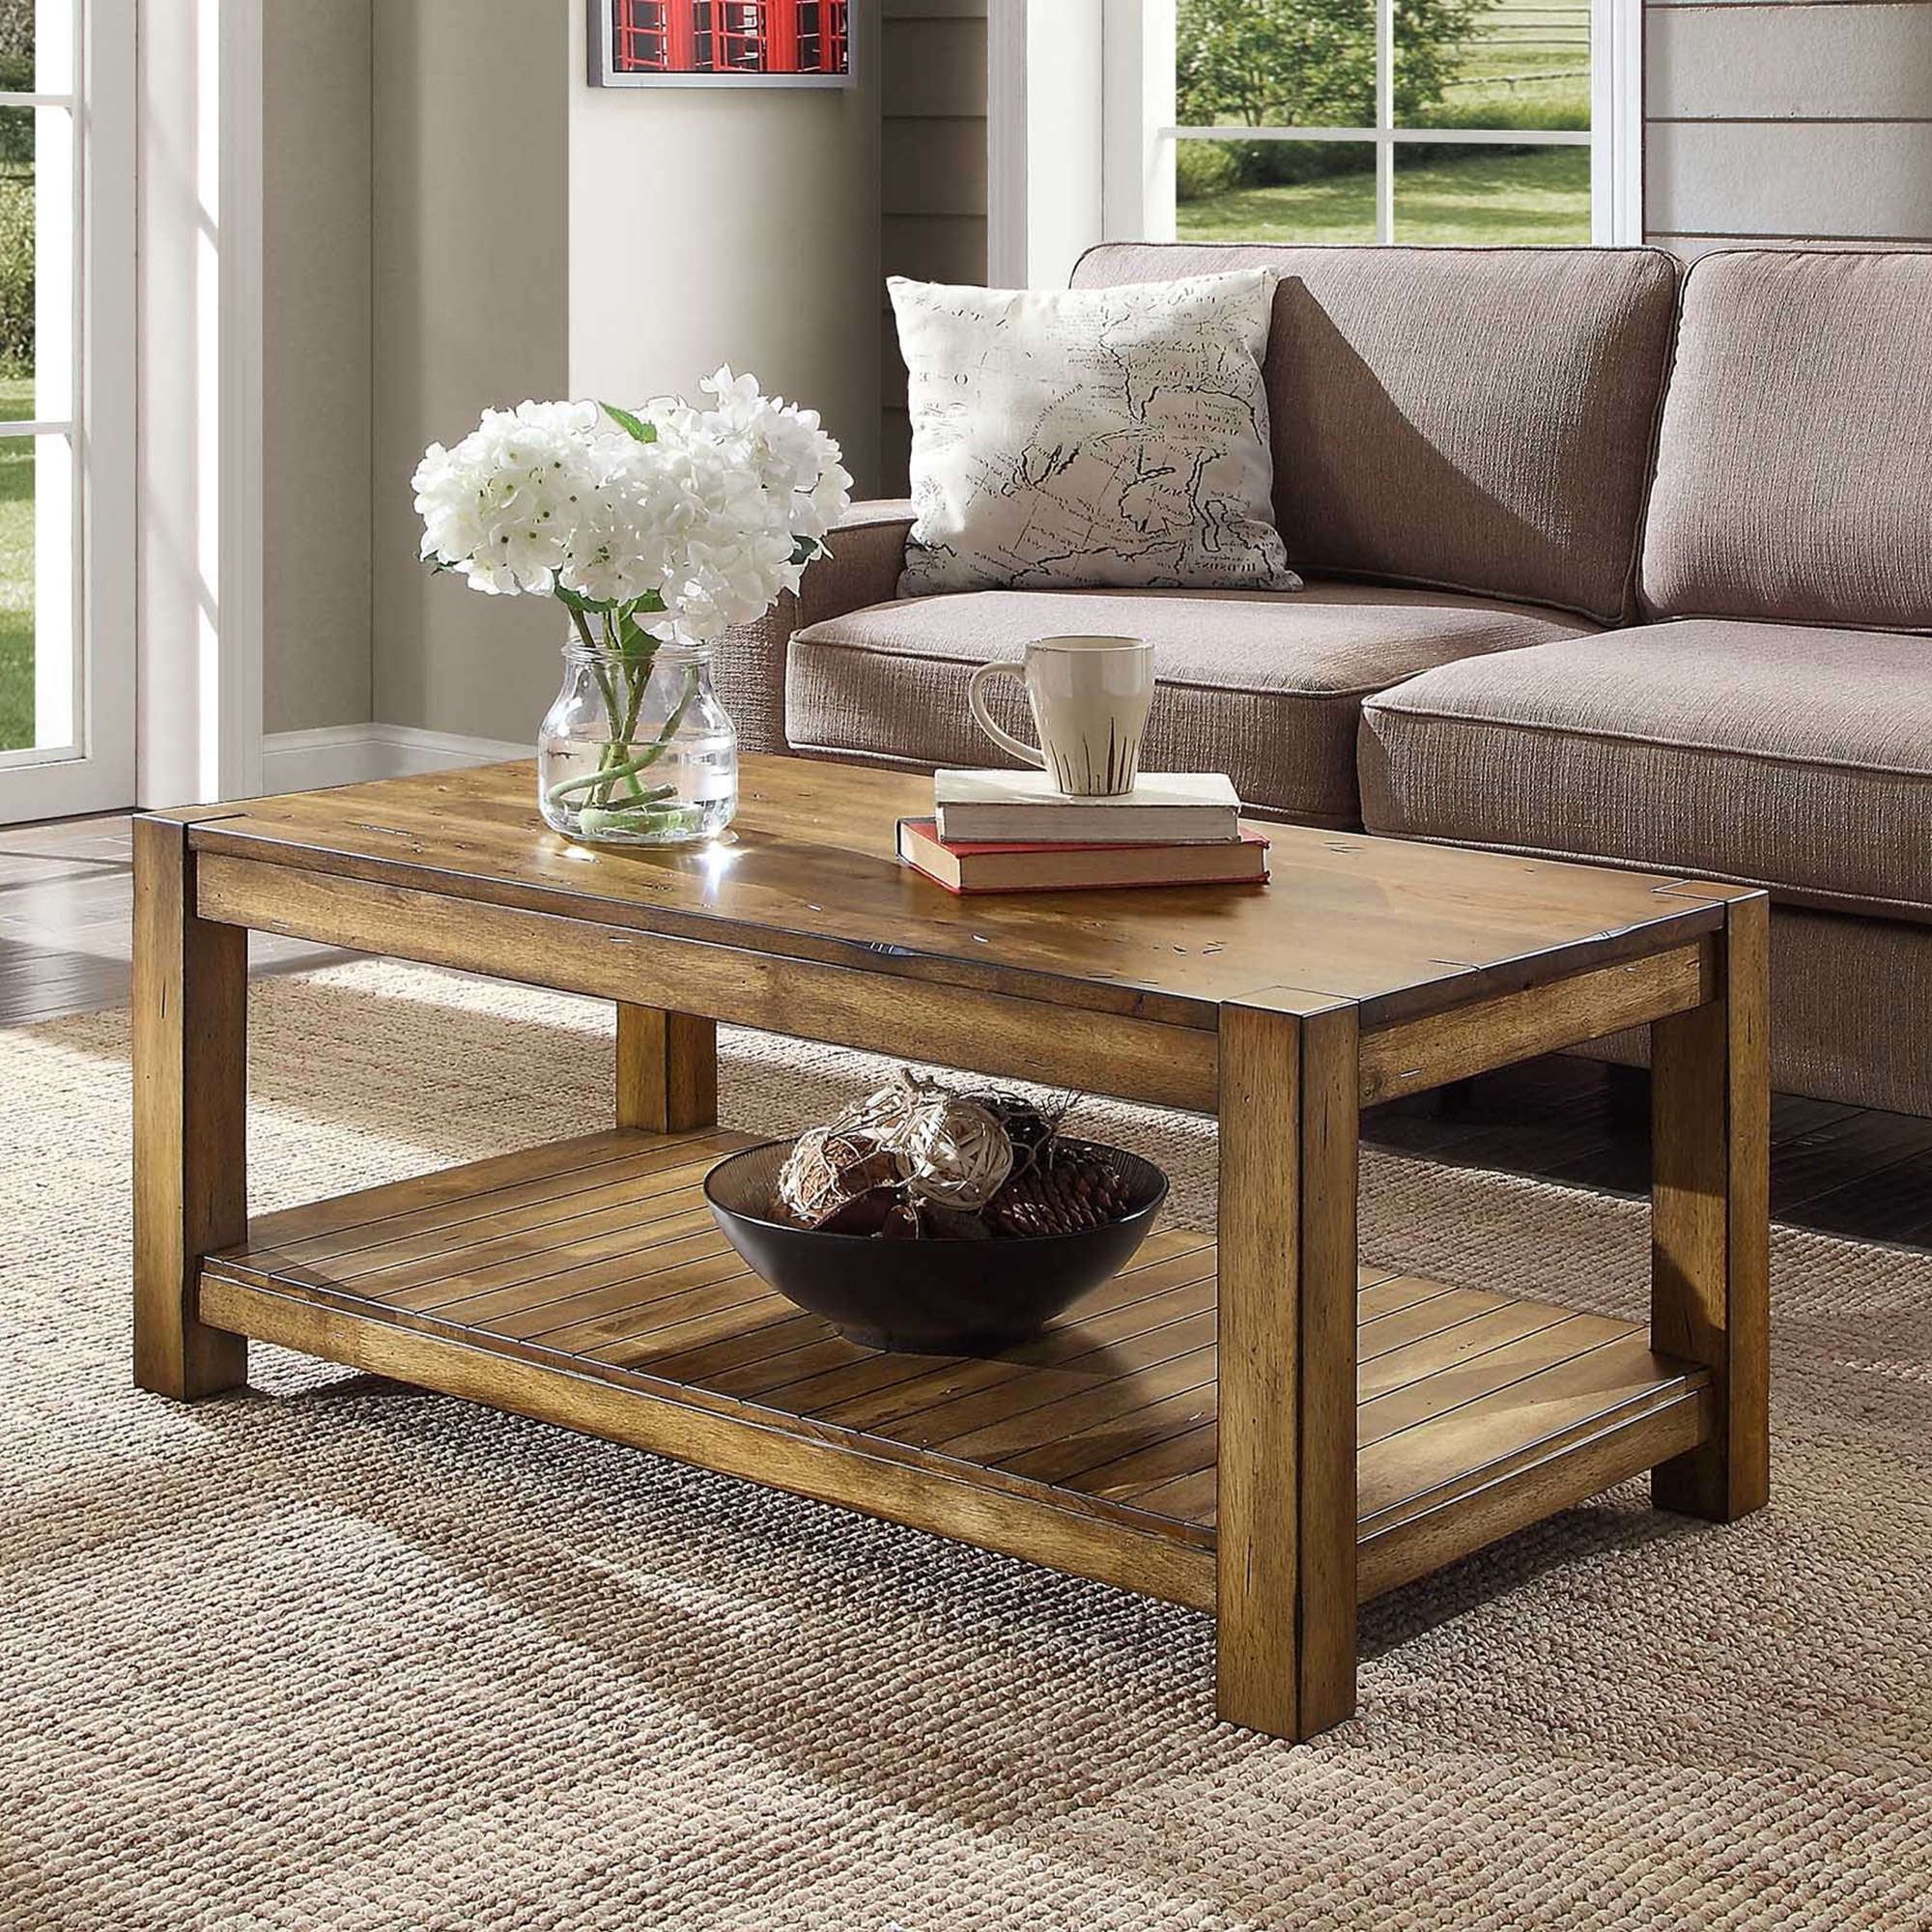 Bryant Solid Wood Coffee Table, Rustic Maple Brown Finish – Walmart Pertaining To Rustic Wood Coffee Tables (Gallery 5 of 20)